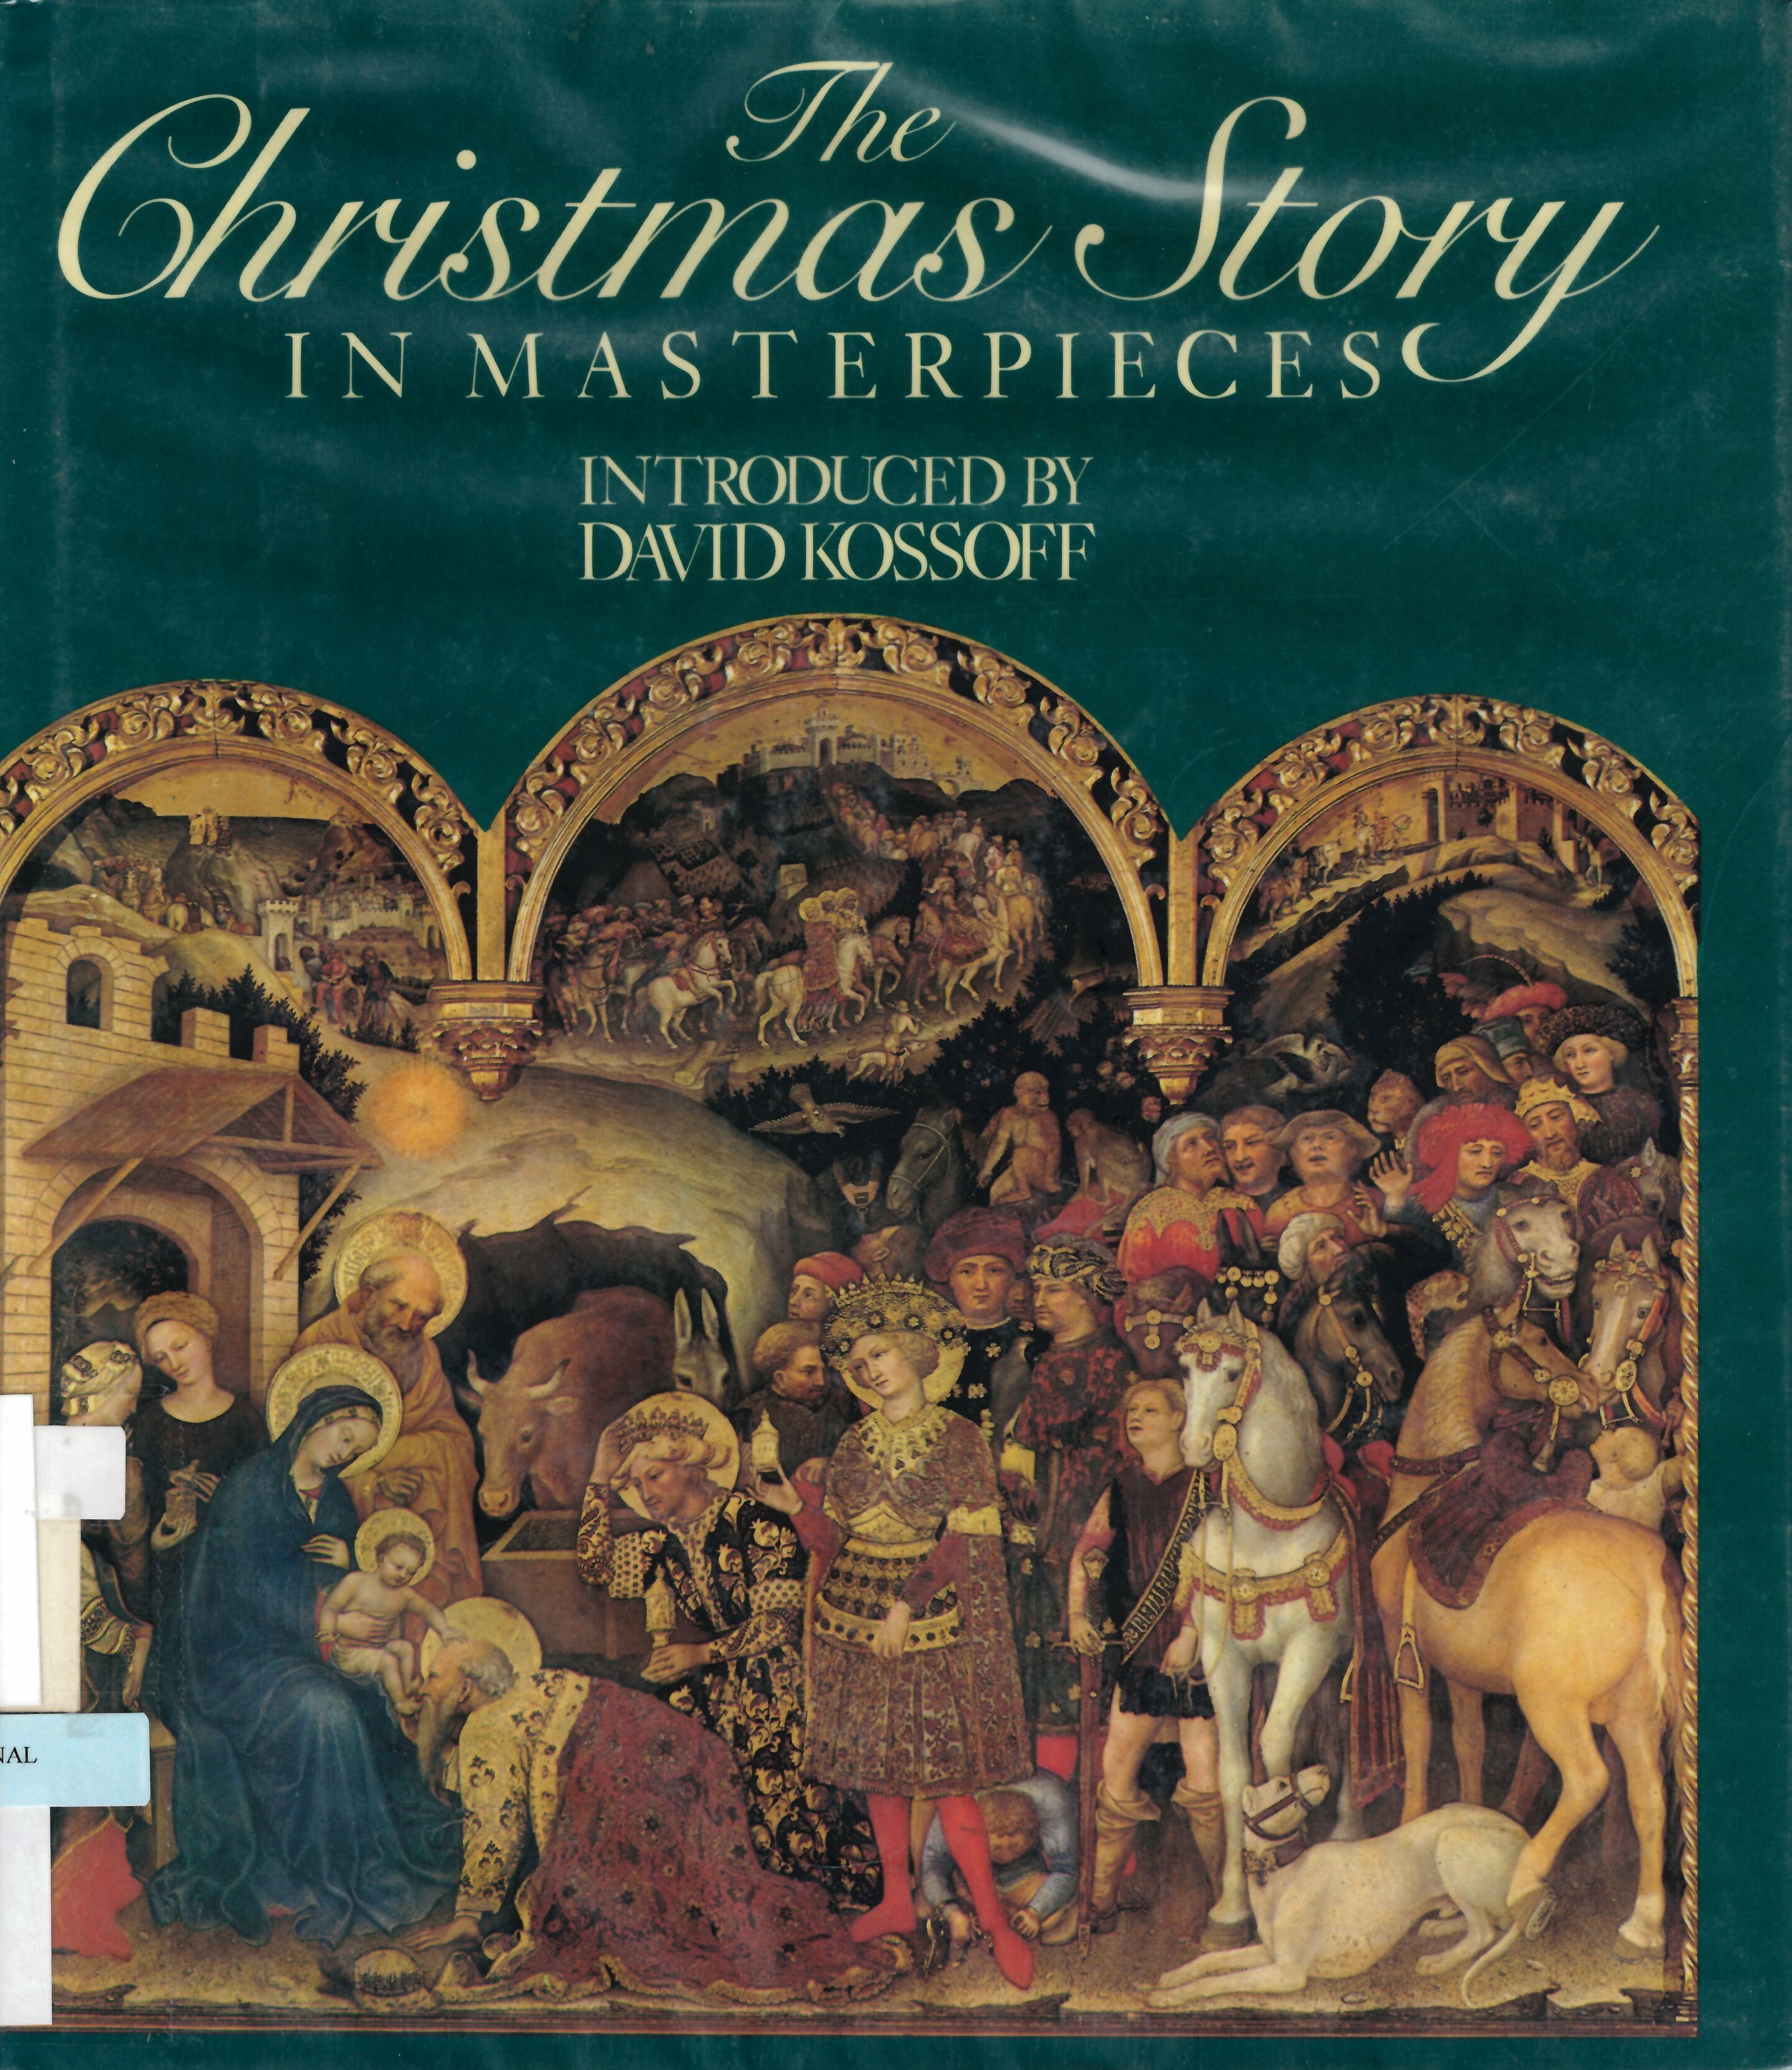 The Christmas story in masterpieces